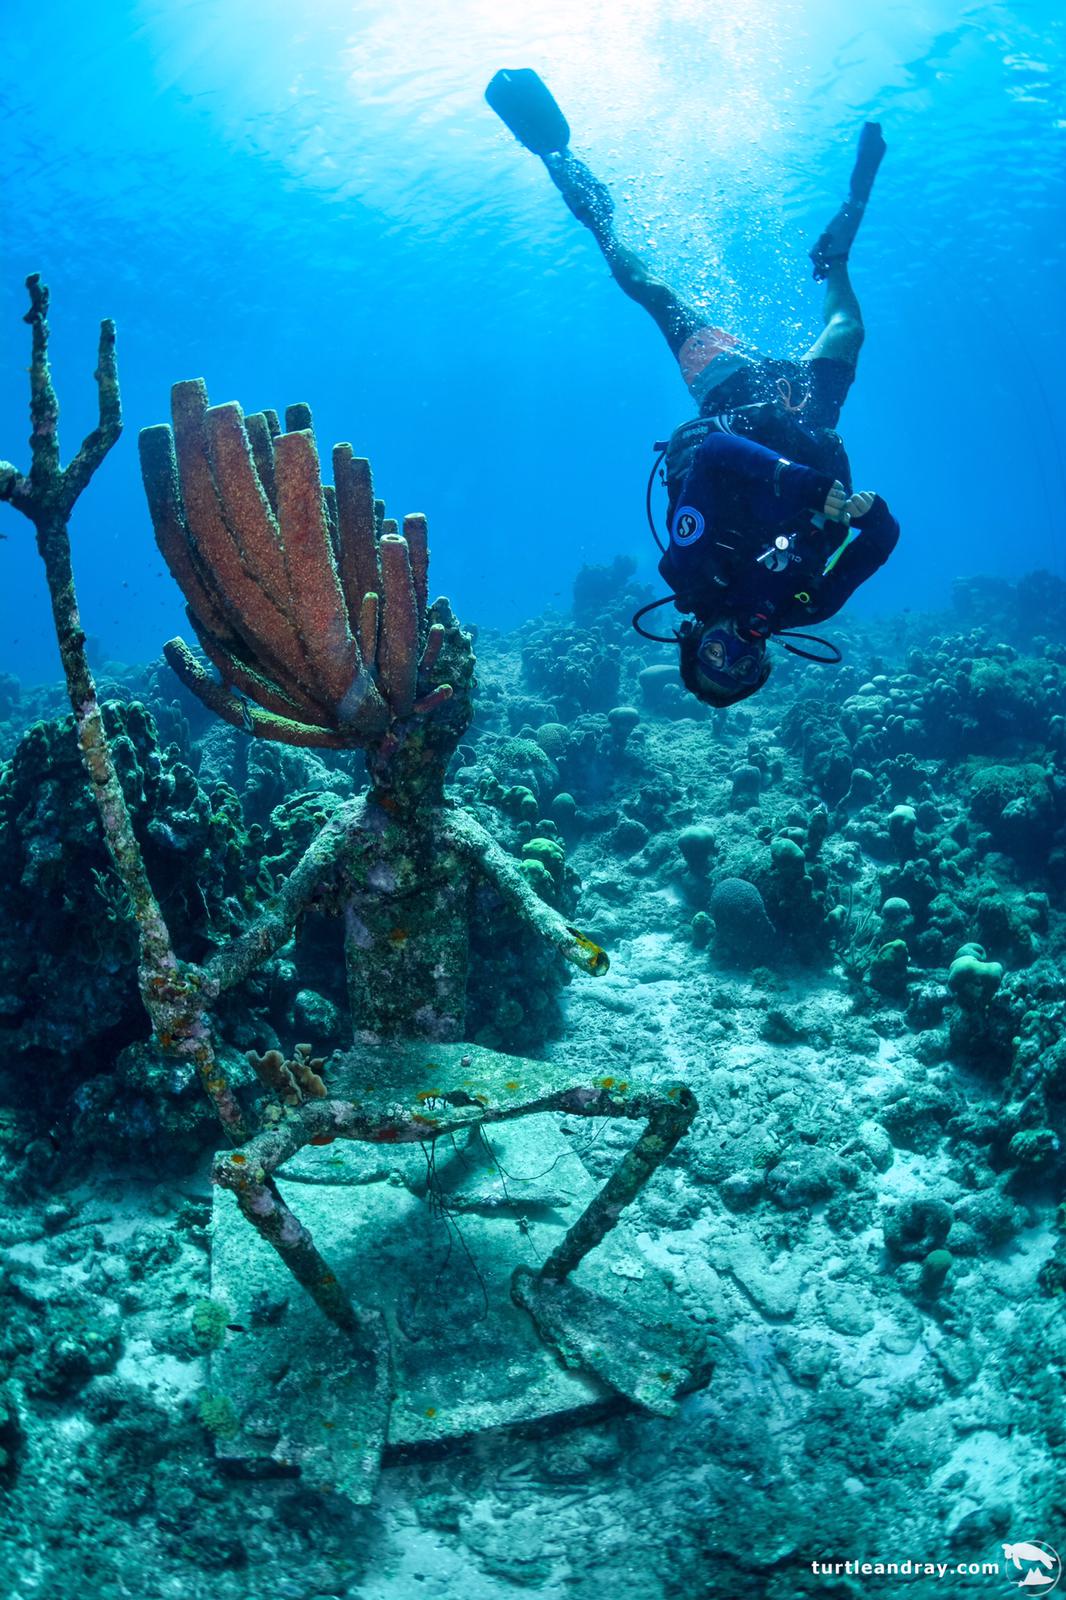 Diver upside down standing next to Poseidon statue